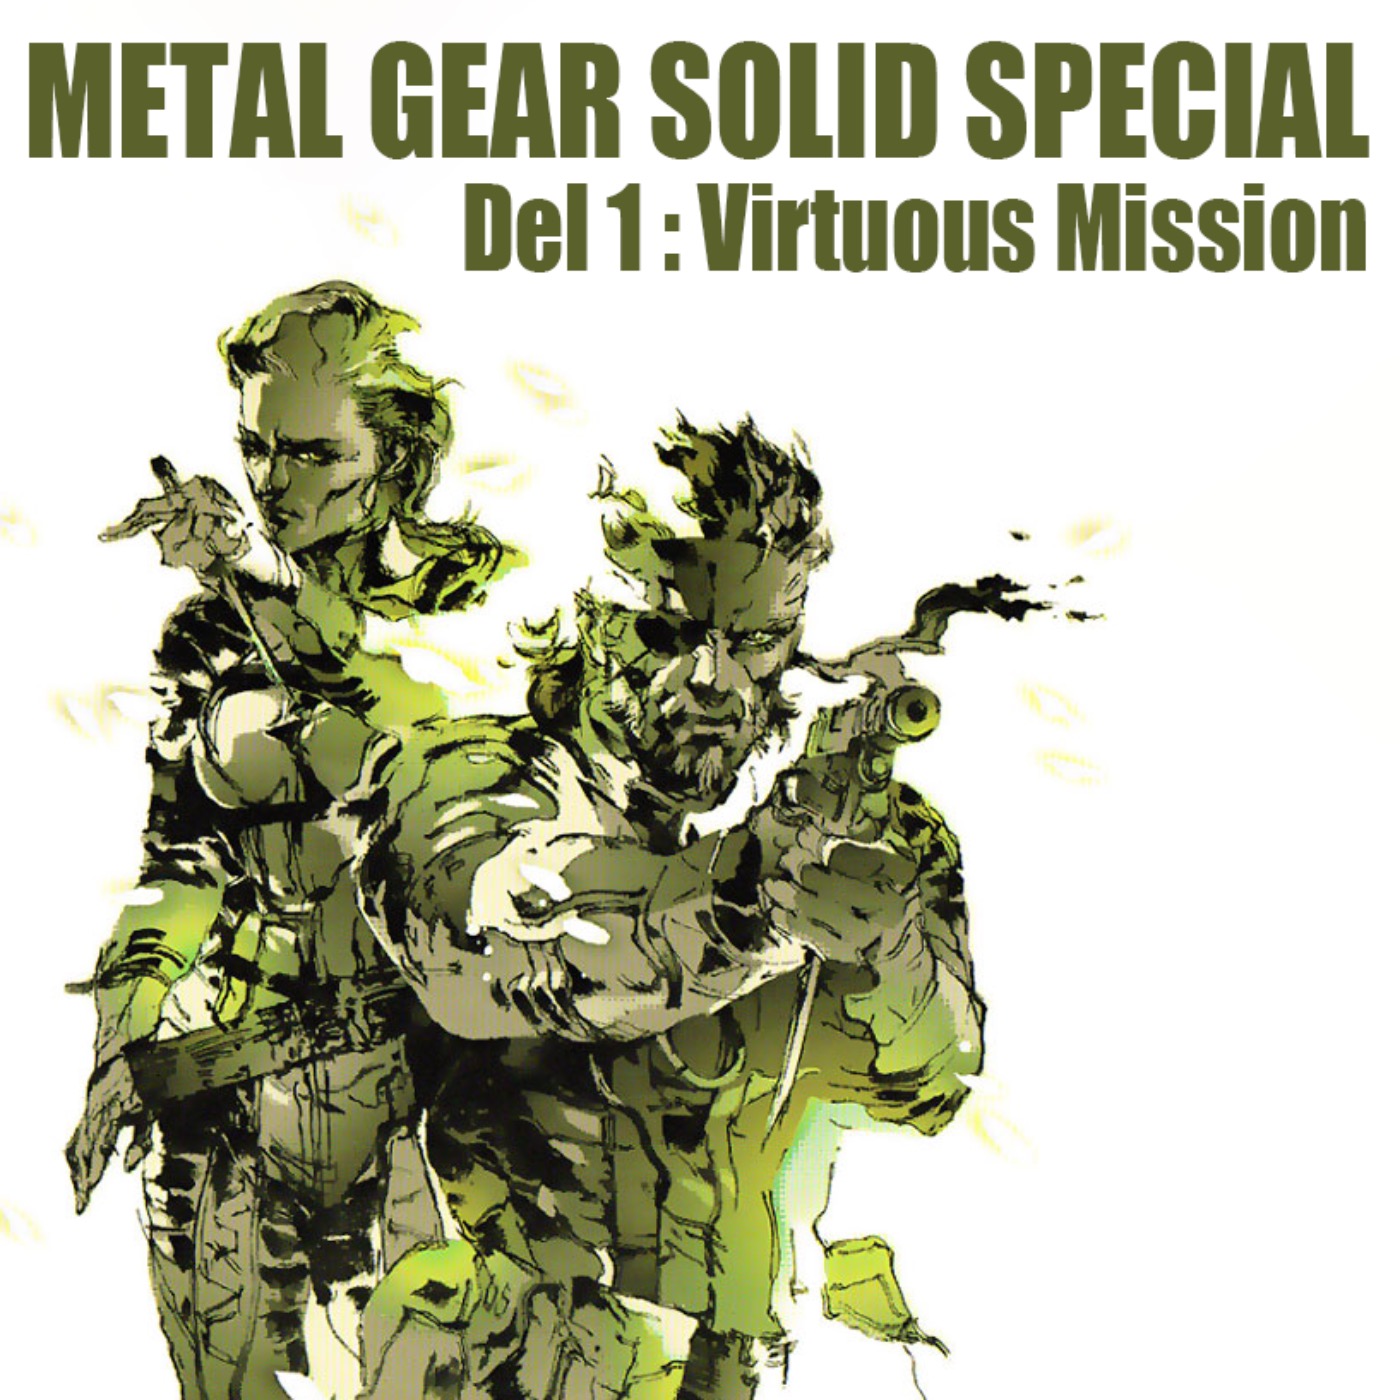 SPECIAL - Metal Gear Solid 3 Del 1: Virtuous Mission